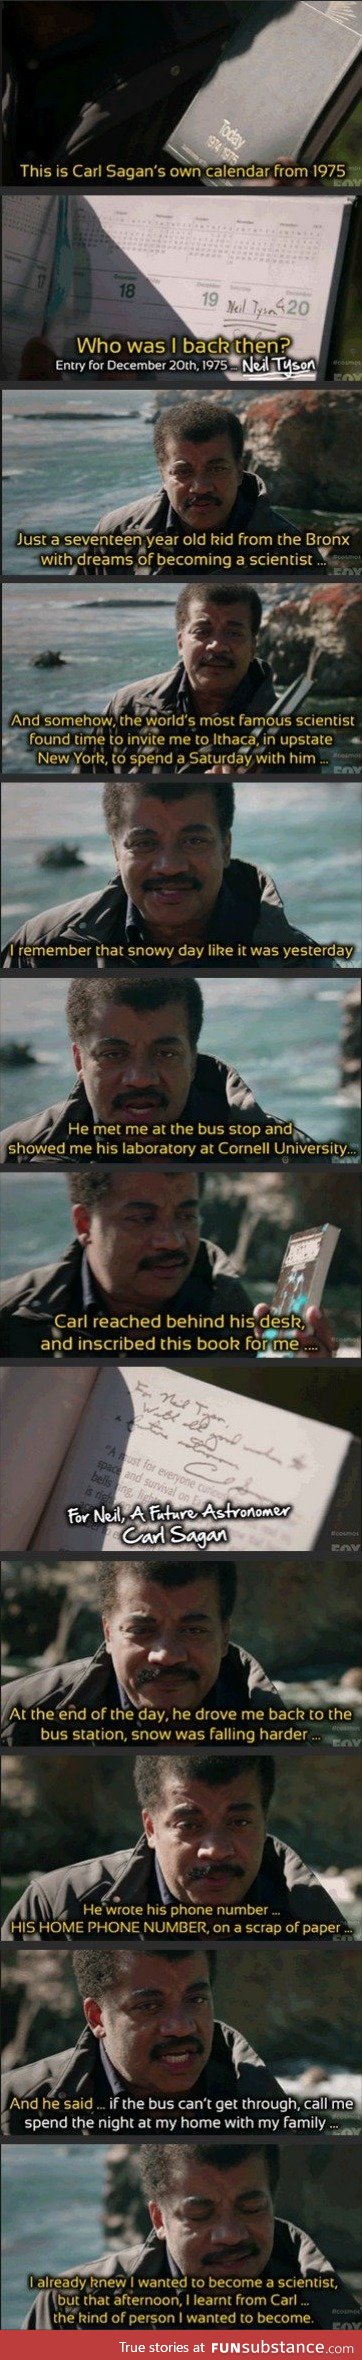 This is why Dr. Neil Tyson is the logical choice to bear the torch of Dr. Carl Sagan.